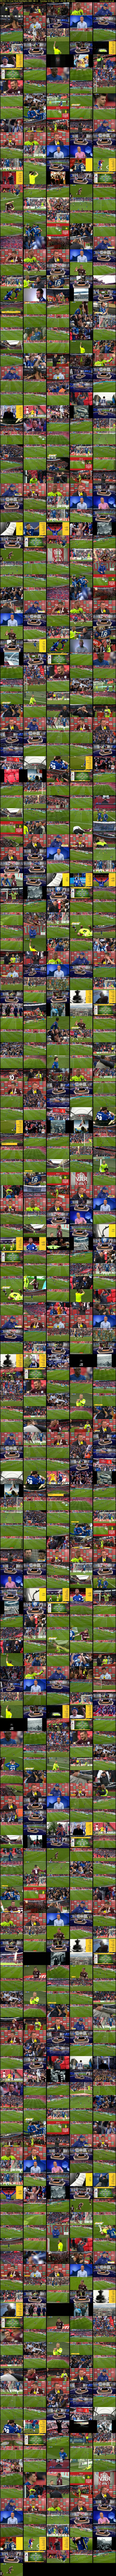 MOTD: FA Cup Final Highlights (BBC RB 1) Sunday 16 May 2021 20:39 - 05:49